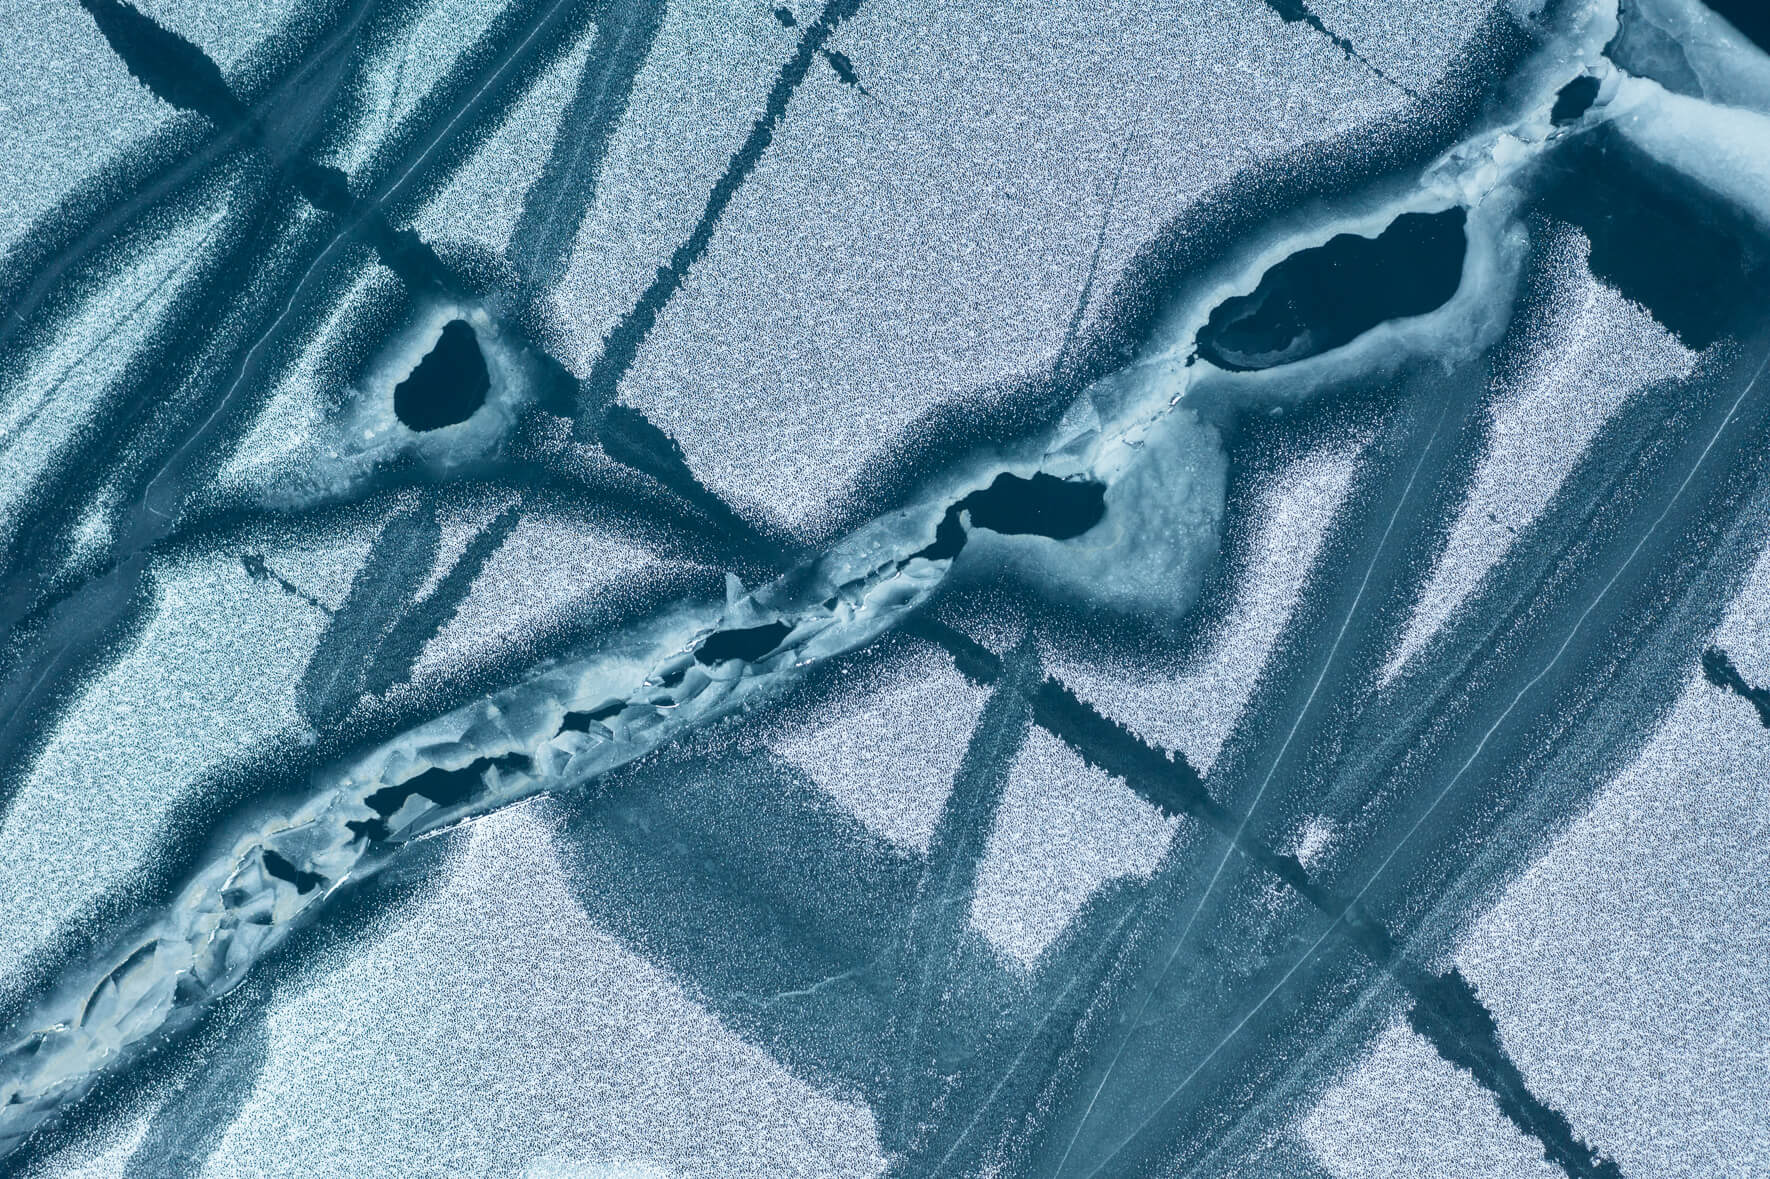 Cracks and open channels in the ice of a frozen lake caused by fluctuations in temperature